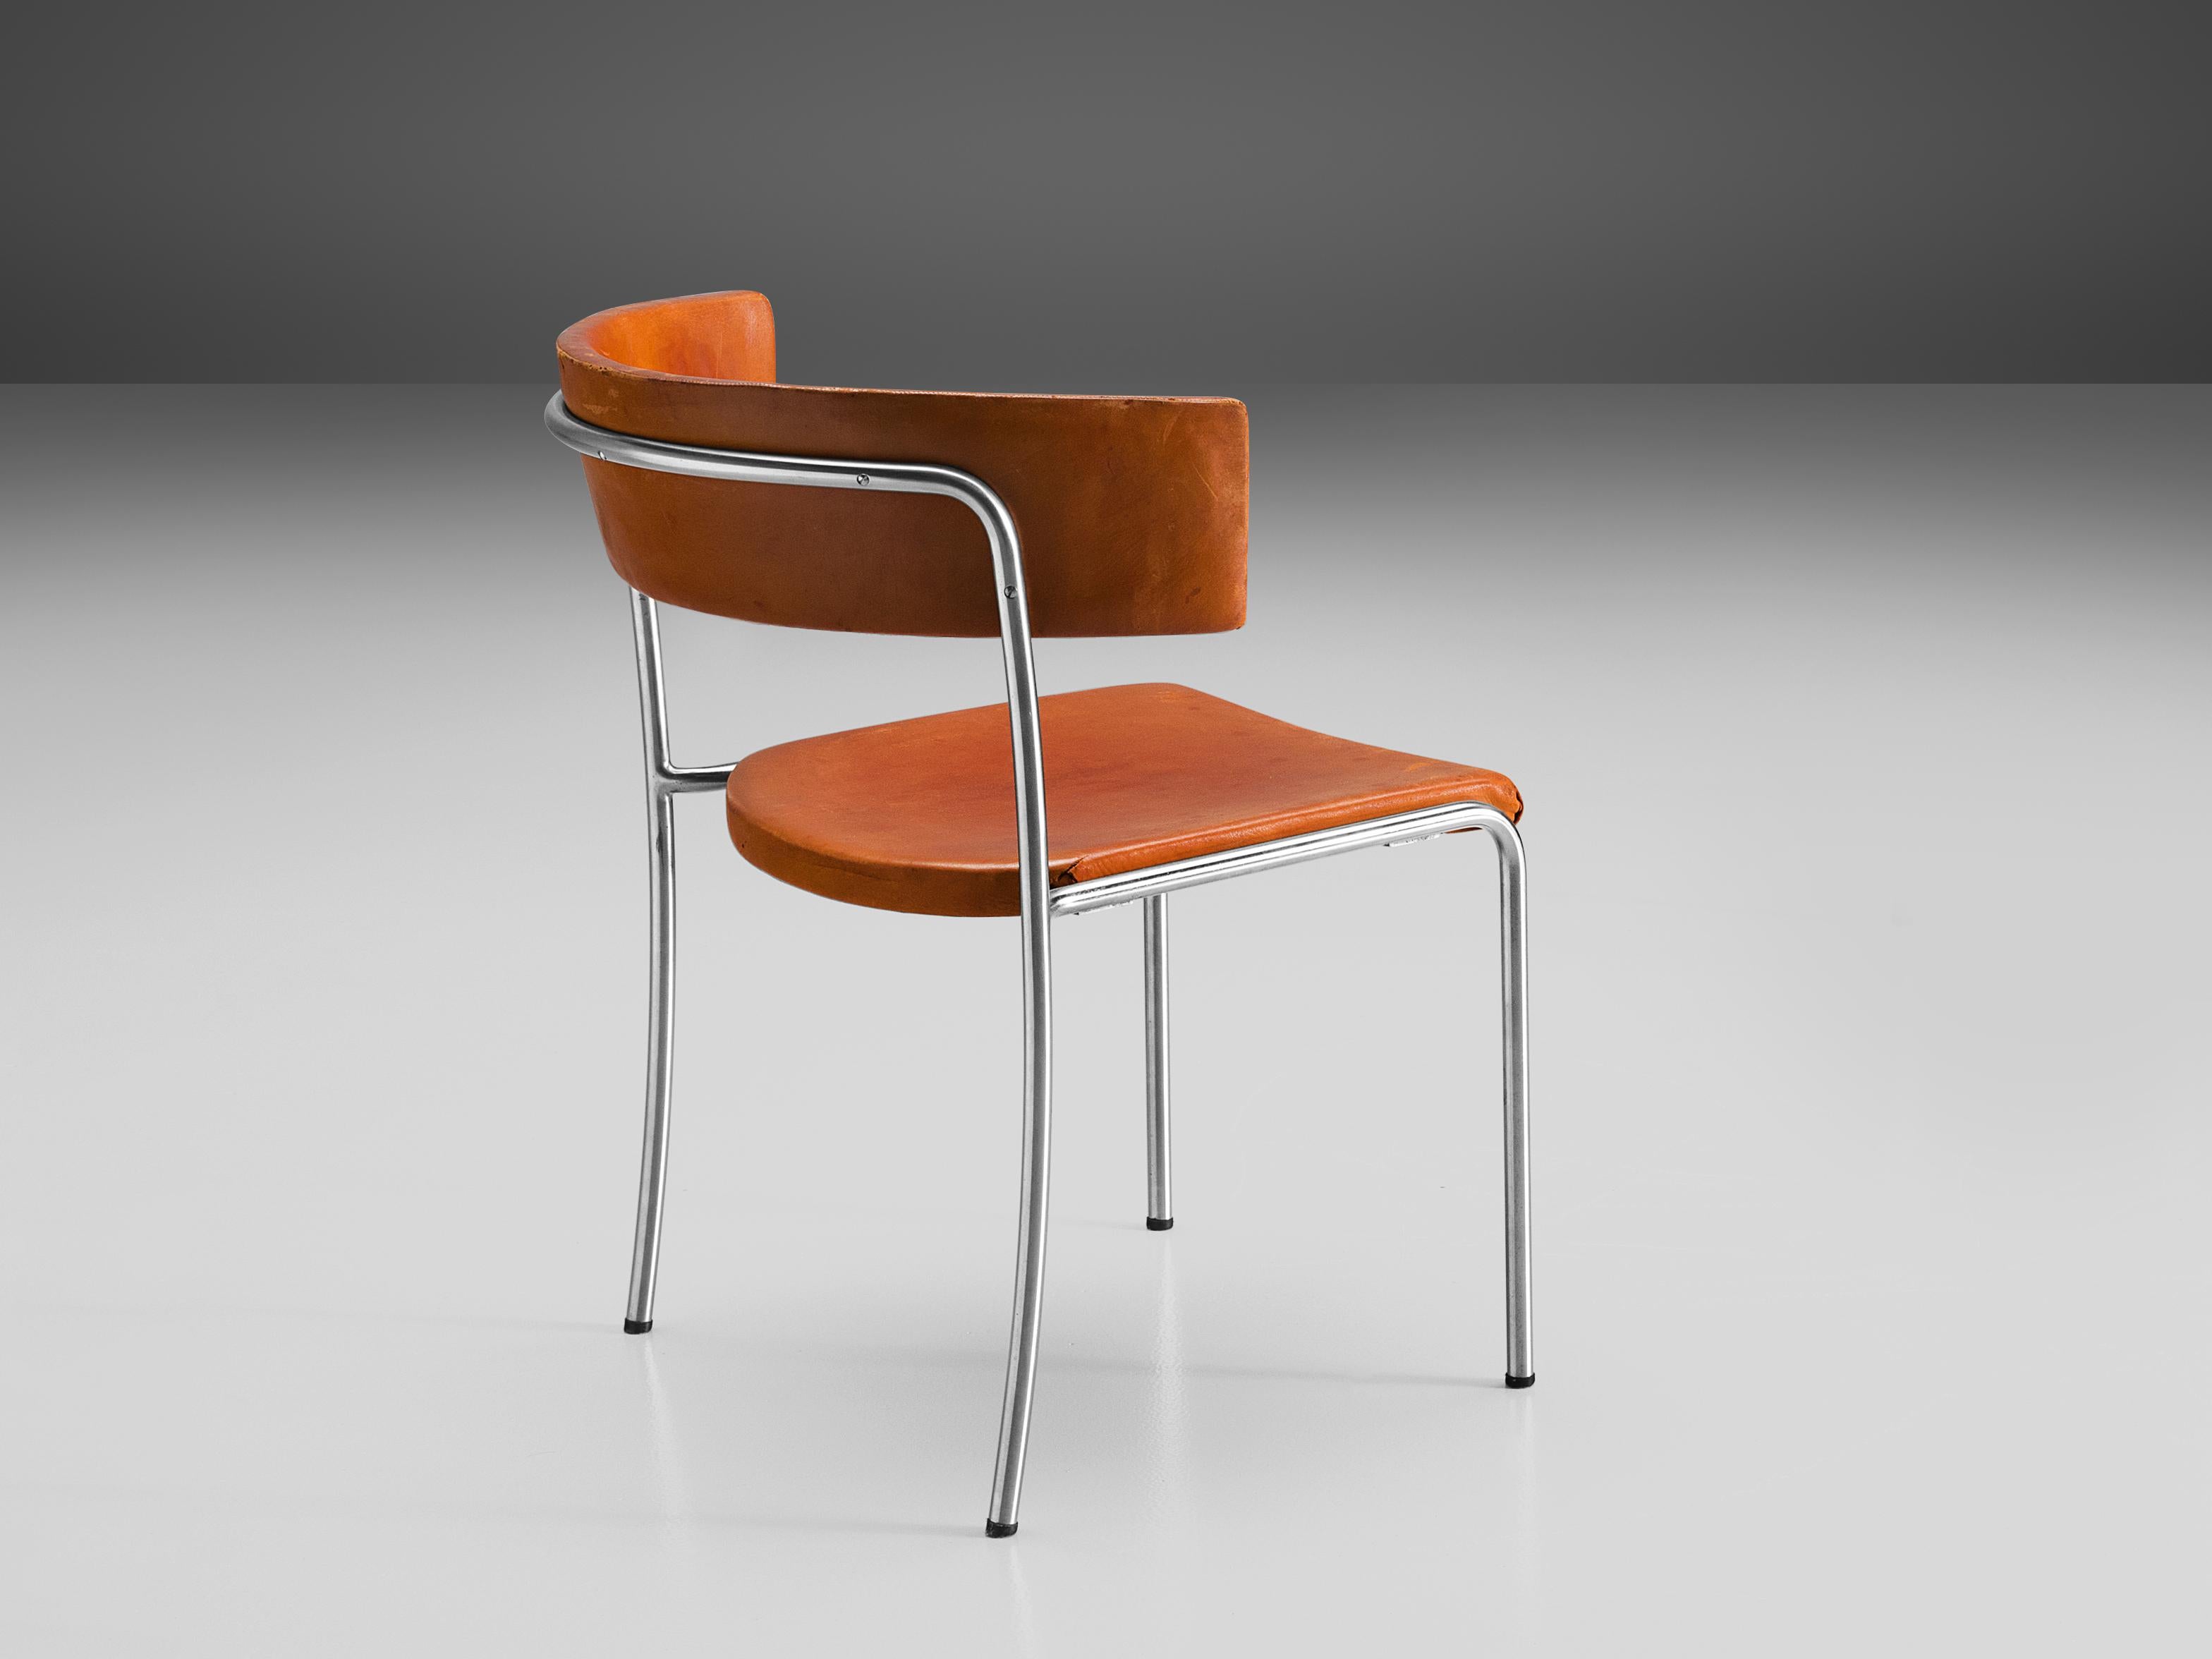 Erik Karlström, side chair, cognac leather, metal, Sweden, 1965

This exceptional chair was designed for the Civic Hall Orebro (1957-1965) which was designed by the architect Erik & Tora Ahlsén. The interior was designed by Erik Karlström and Åke